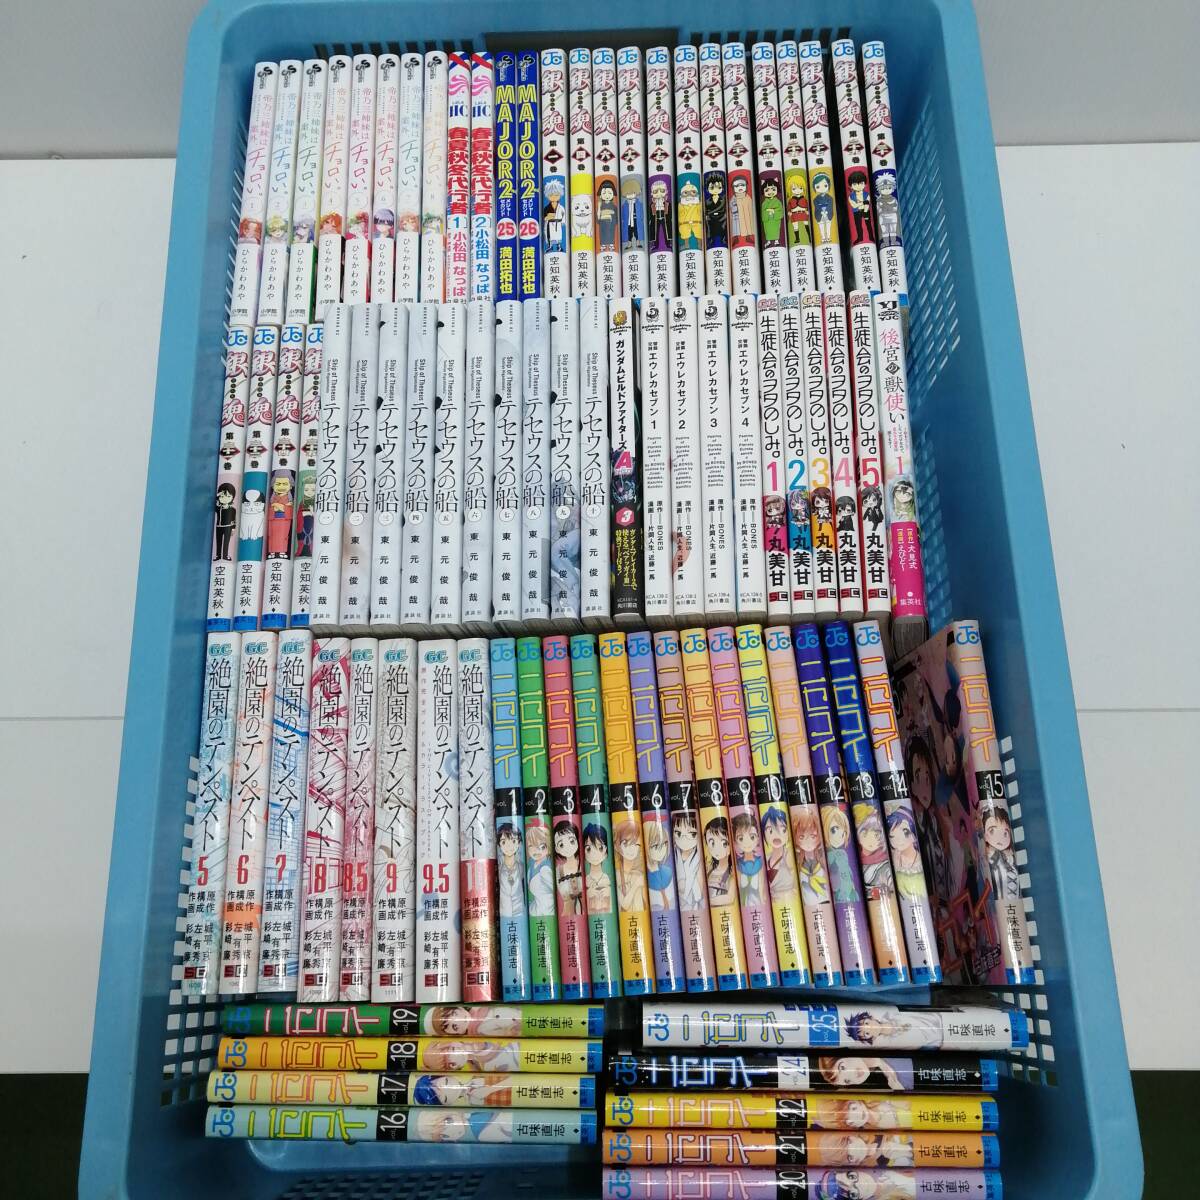 1 jpy ~ Junk not yet inspection goods # comics summarize .. three sisters is . out, Choro ../ Gintama /tese light. boat / raw ... .ta. some stains./nisekoi other 